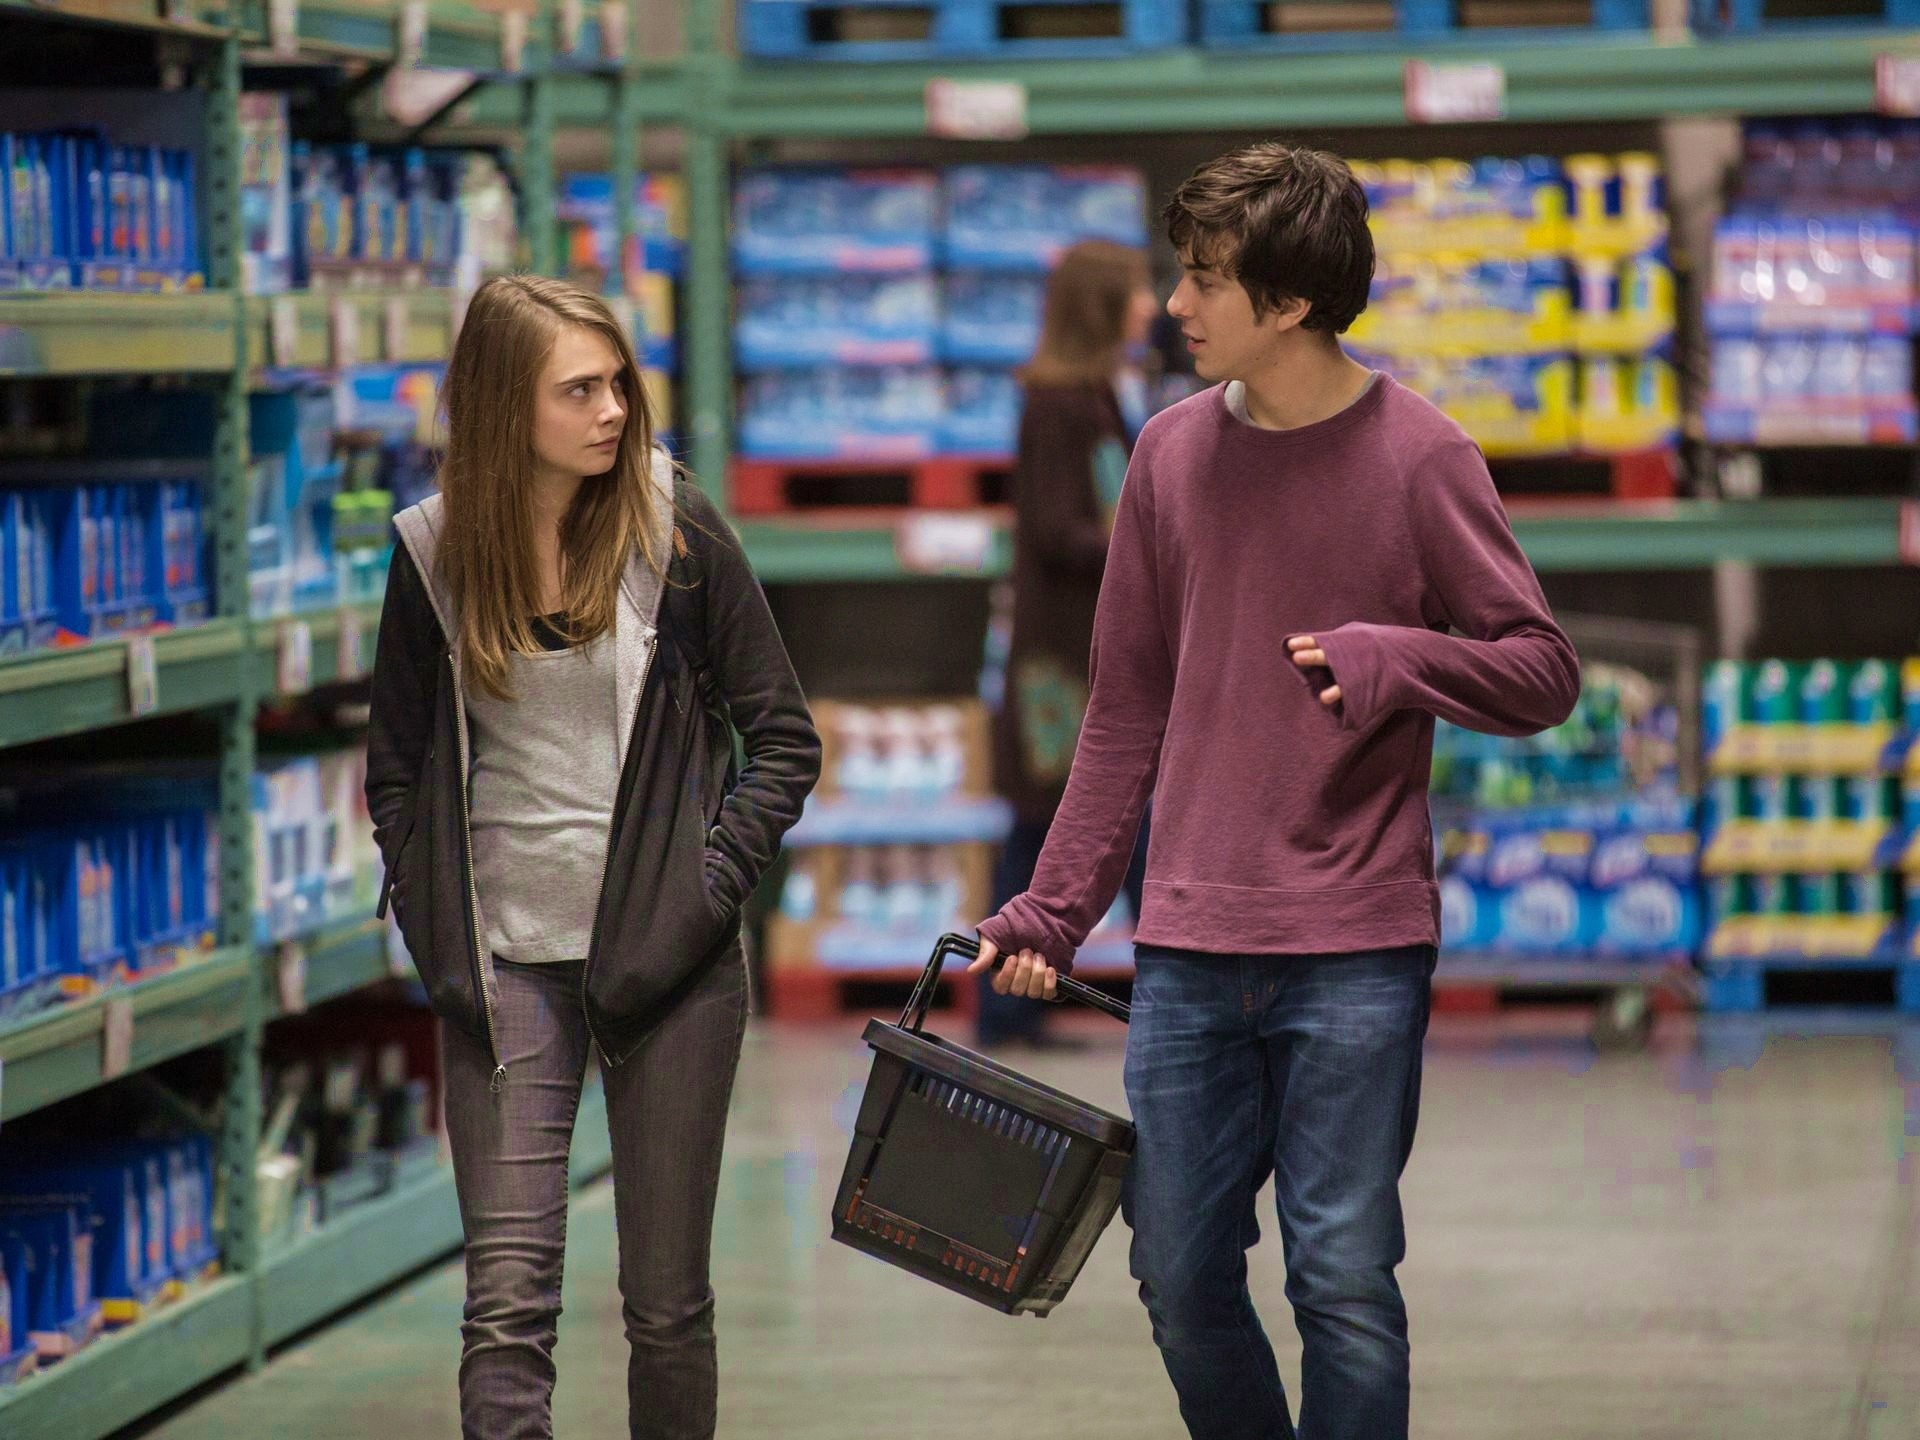 Cara Delevingne stars as Margo Roth Spiegelman and Nat Wolff stars as Quentin Jacobsen in 20th Century Fox's Paper Towns (2015). Photo credit by Michael Tackett.